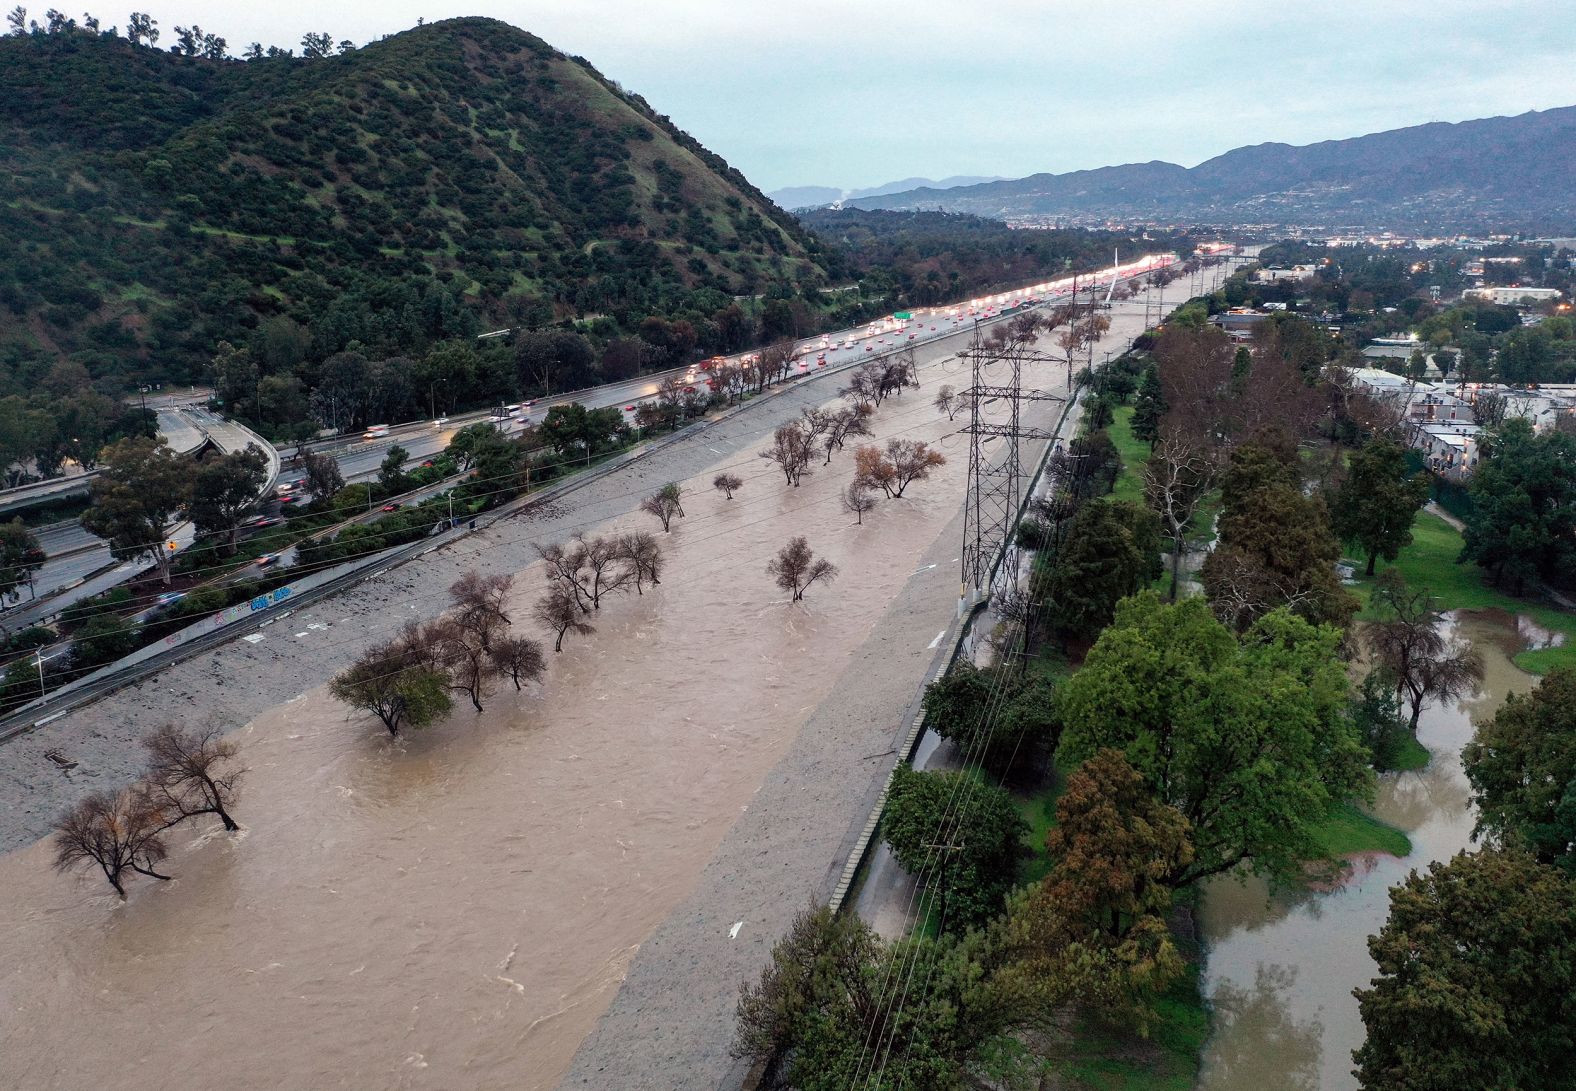 The Los Angeles River is swollen by storm runoff as an <a href="index.php?page=&url=https%3A%2F%2Fwww.cnn.com%2F2024%2F02%2F04%2Fus%2Fpineapple-express-storm-california-weather-monday%2Findex.html">intense, long-lasting atmospheric river</a> drenched Southern California with record-breaking rainfall on Monday, February 5.